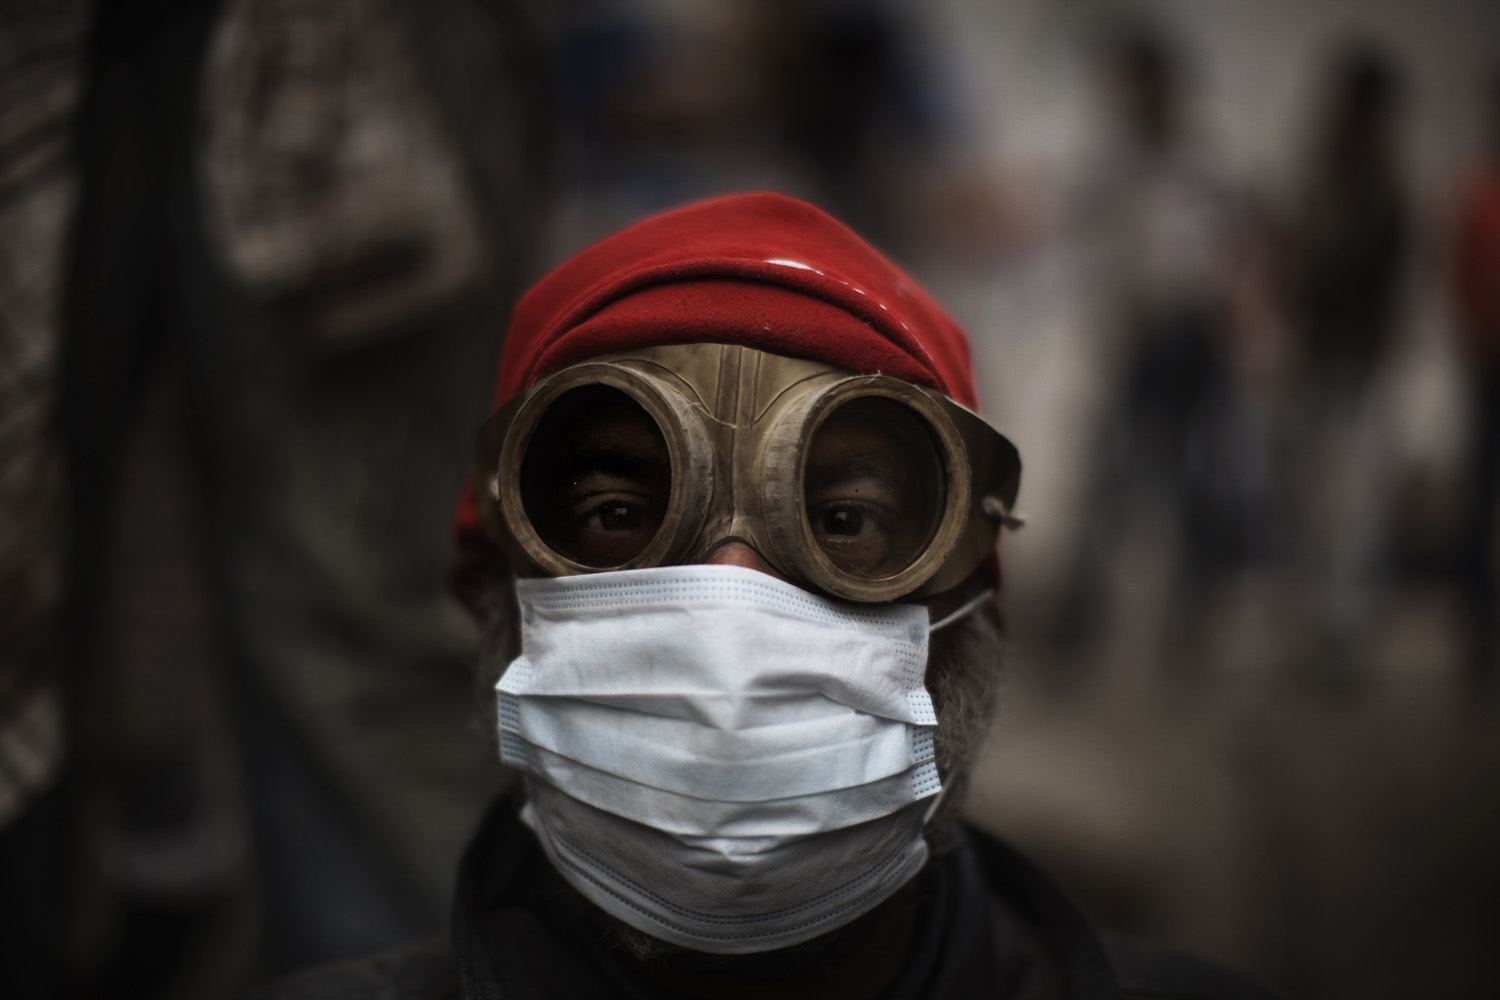 Feb. 6, 2012. An Egyptian demonstrator uses goggles and a mask to shield himself from tear gas fired by riot police during confrontations outside Cairo's security headquarters. Clashes continued in the wake of deadly football violence in Port Said amid calls by activists for civil disobedience.